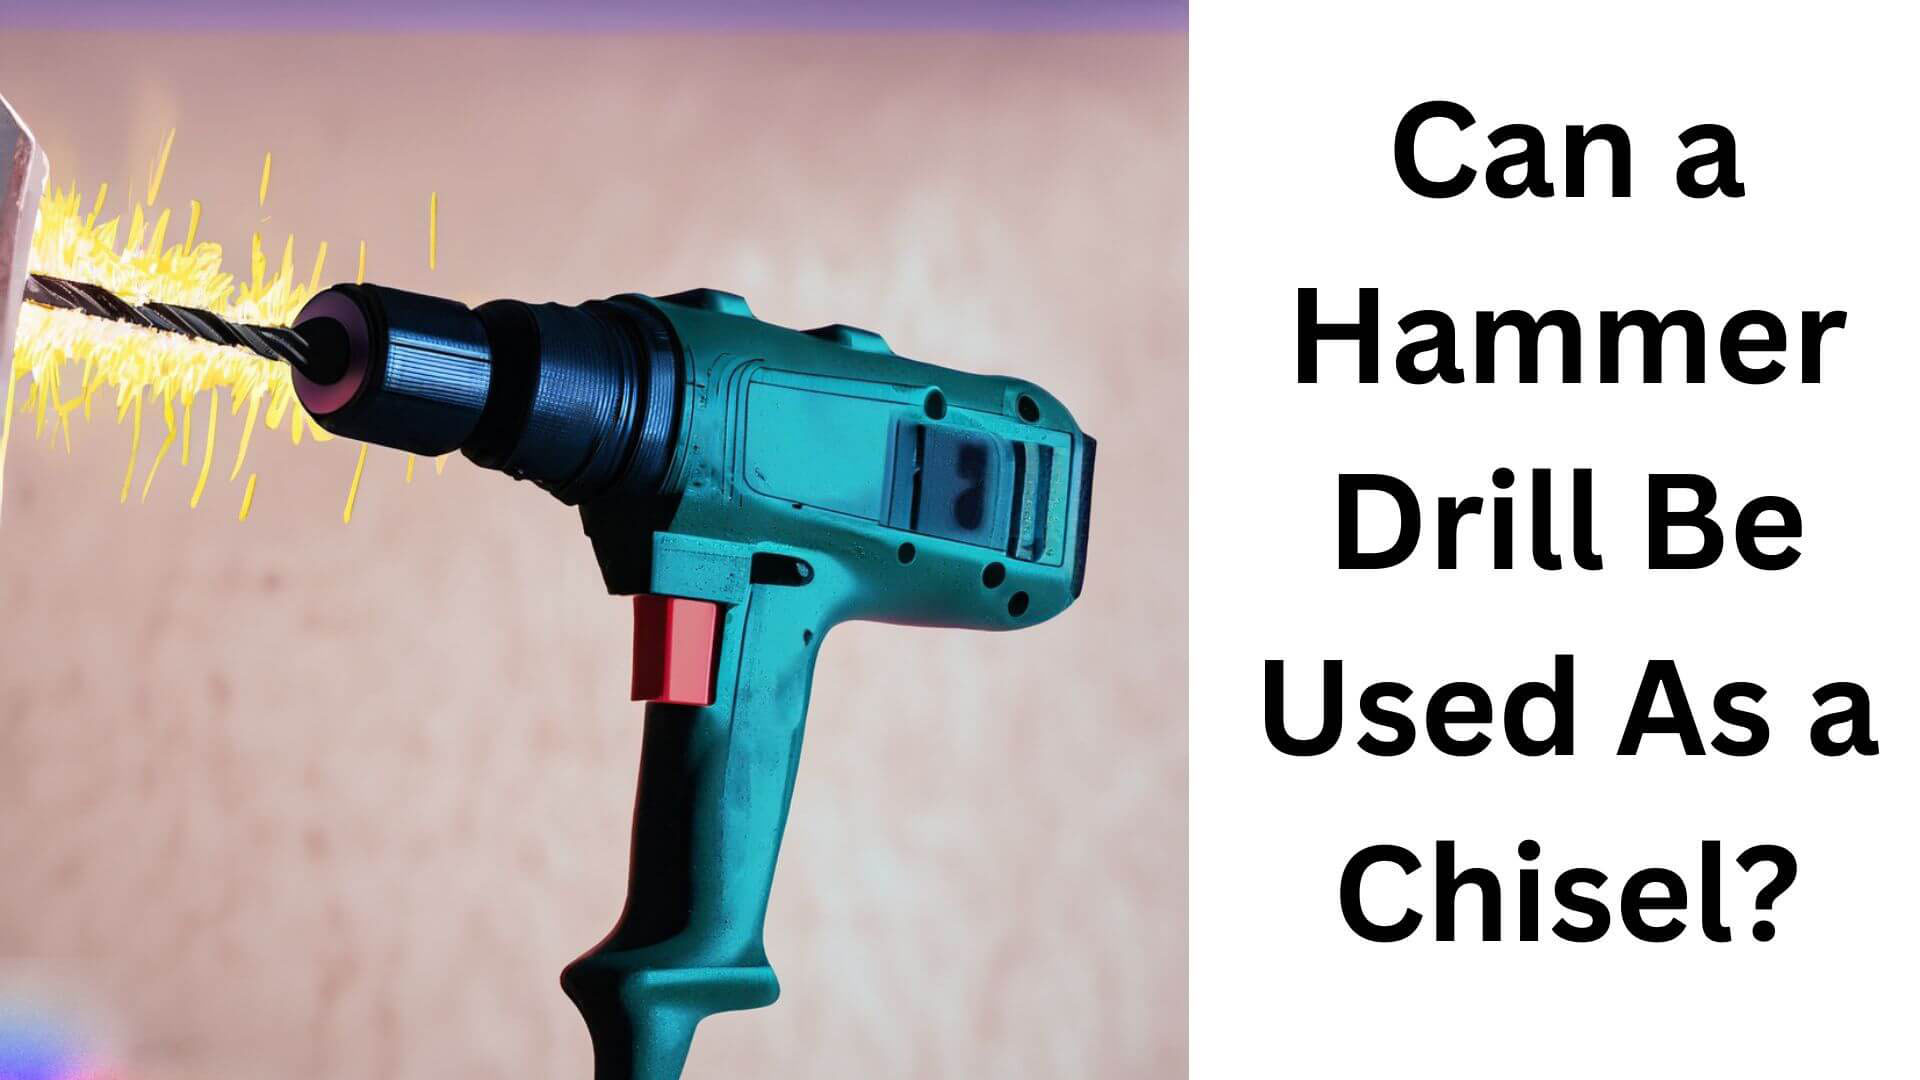 Can a Hammer Drill Be Used As a Chisel?